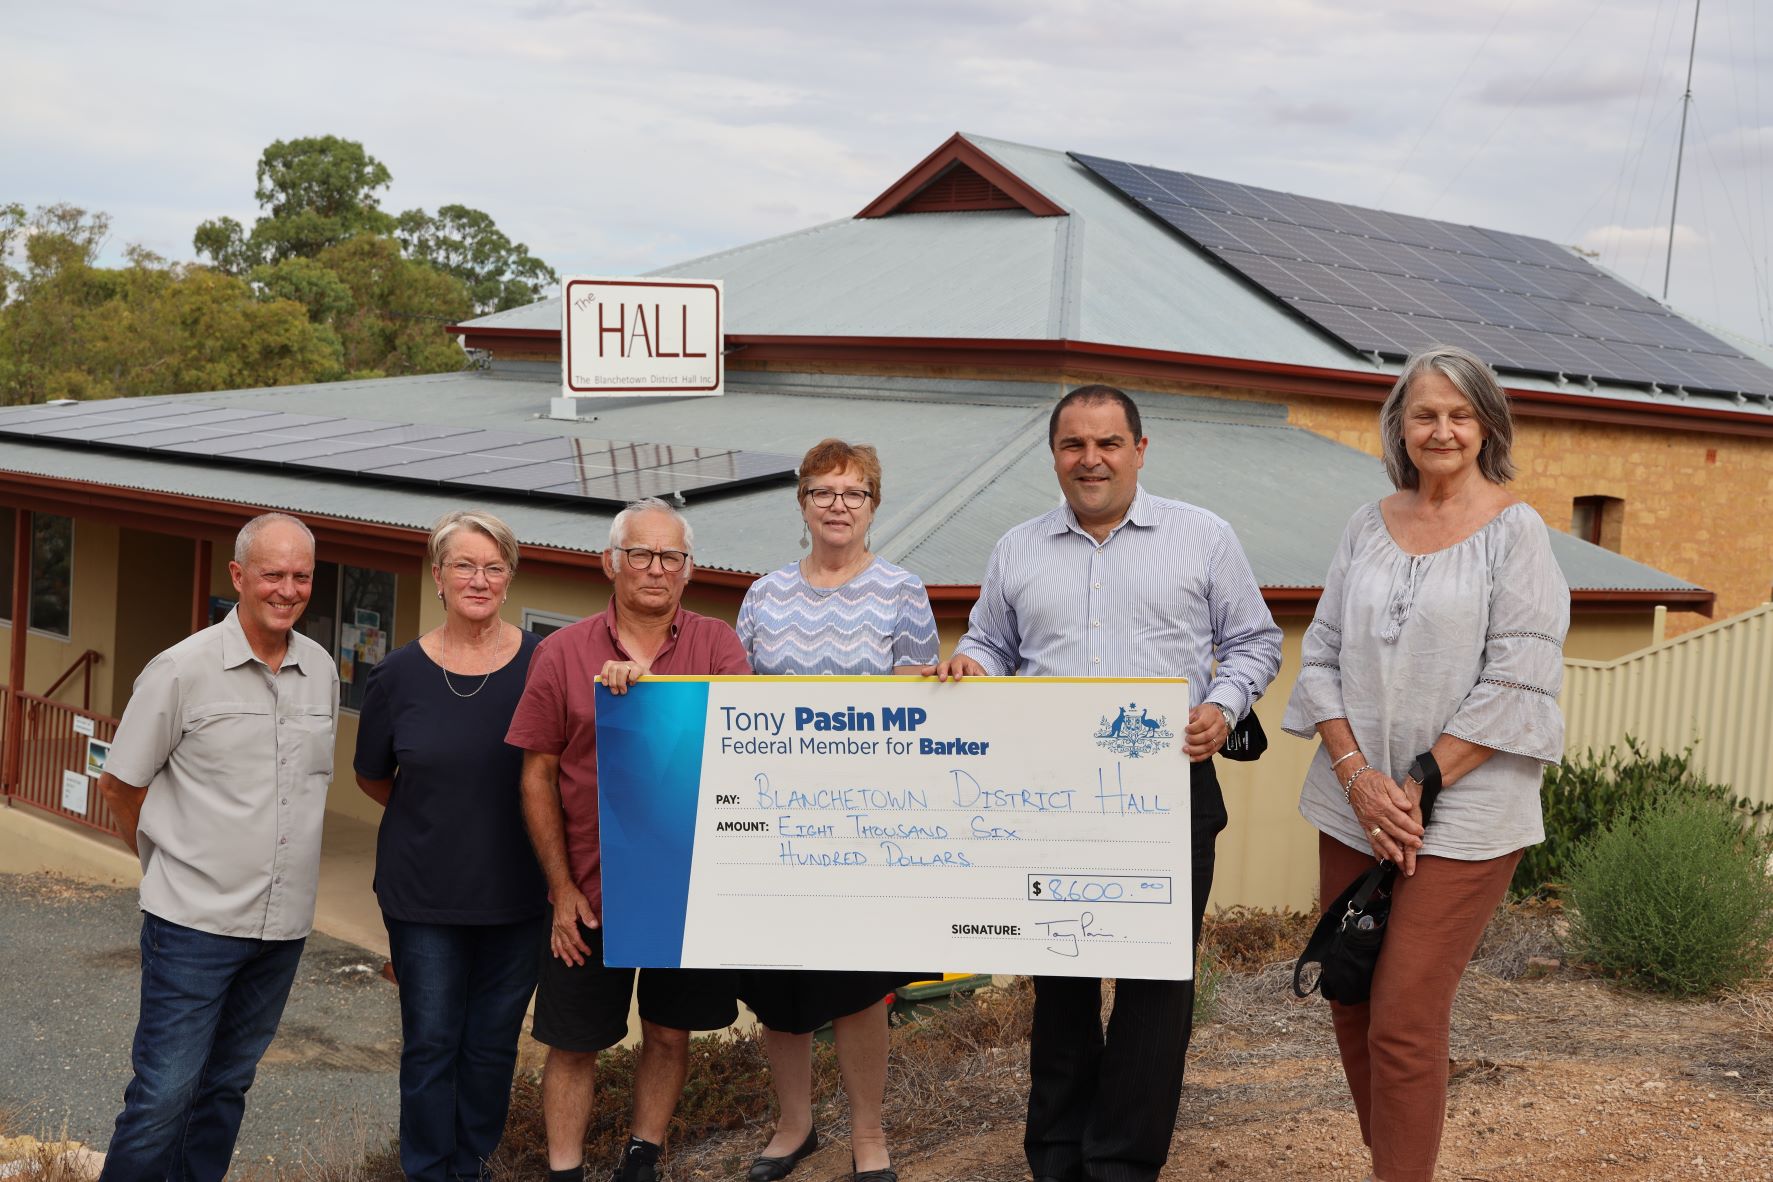 LOWERING ENERGY COSTS FOR COMMUNITY GROUP IN BLANCHETOWN